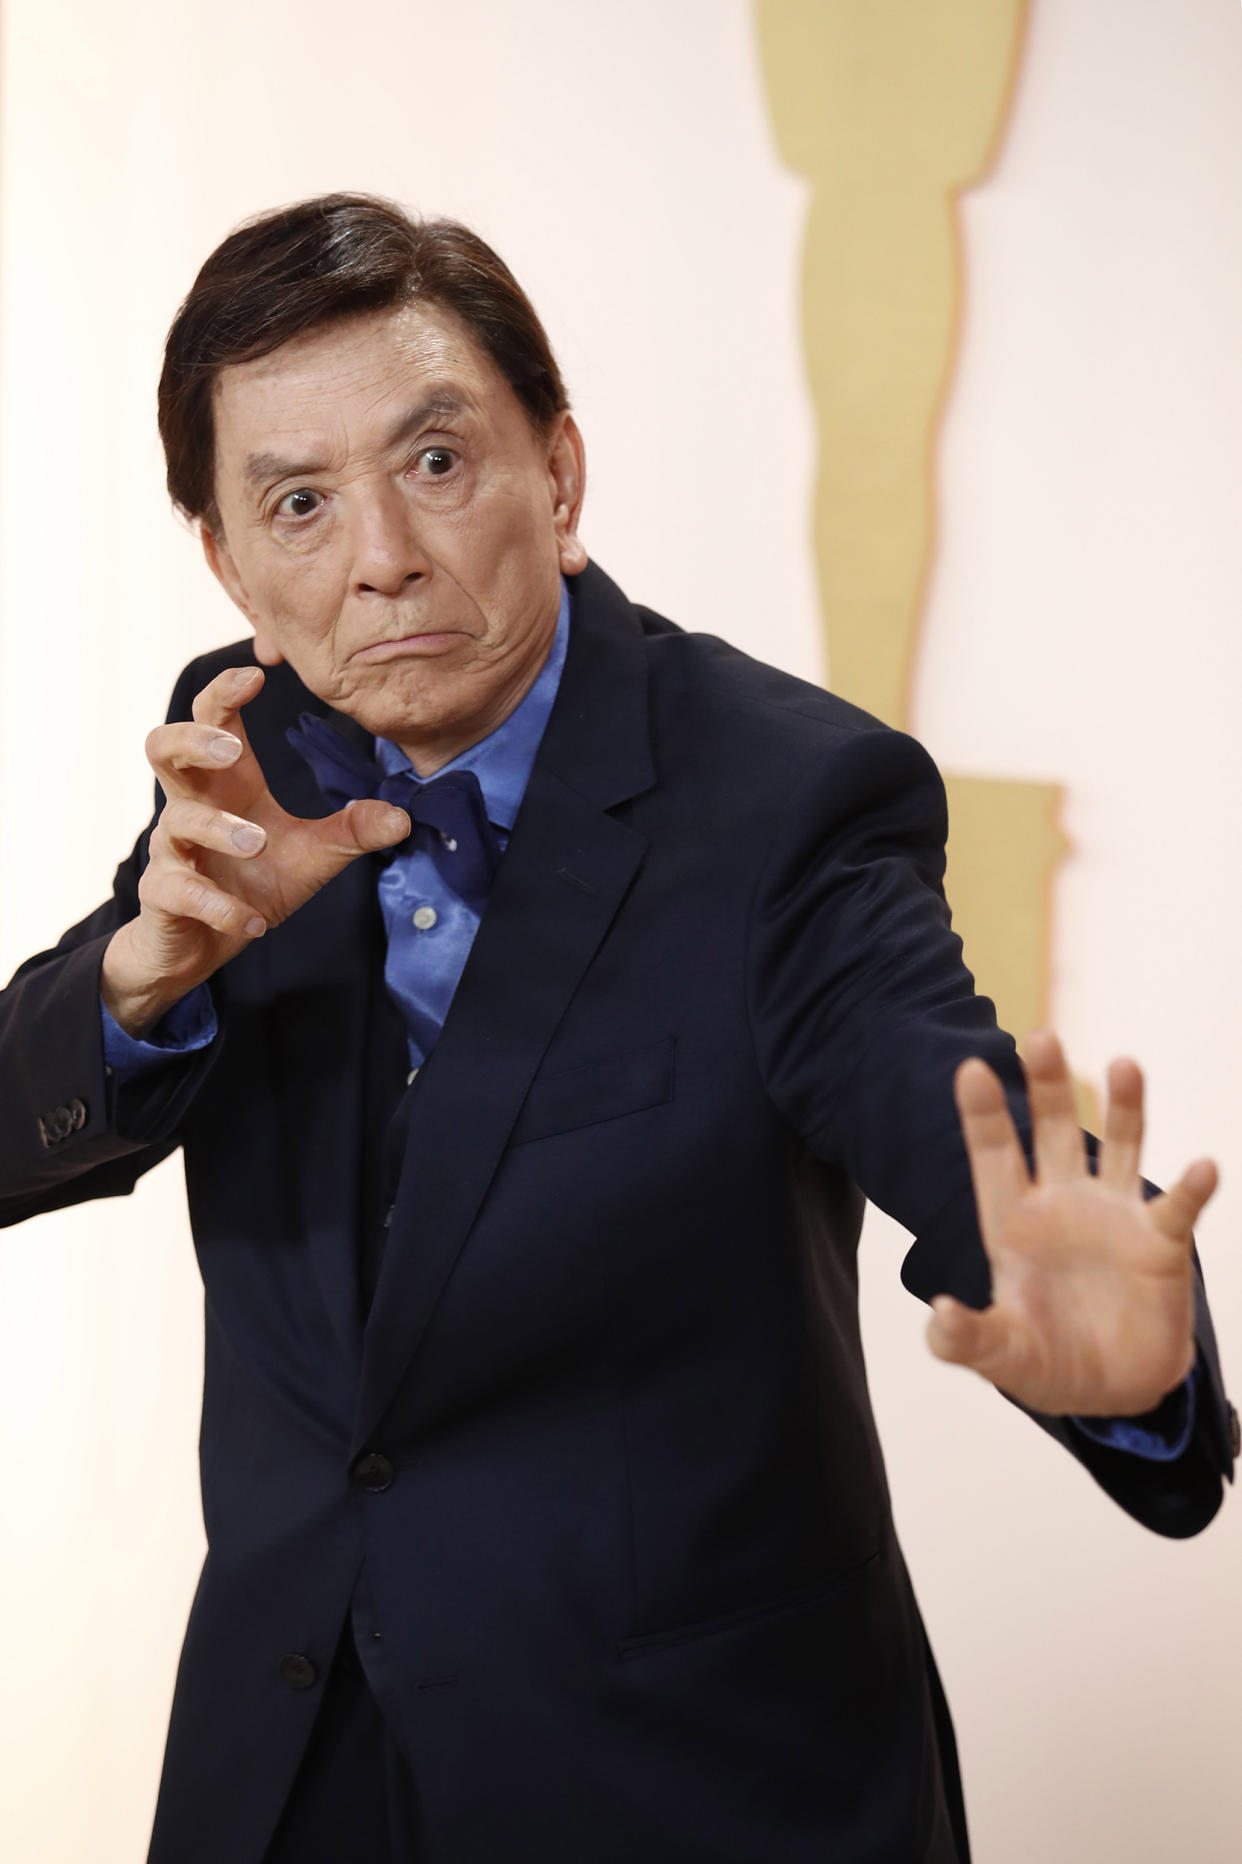 James Hong arrives at the Oscars on Sunday, March 12, 2023 in Los Angeles. (CAROLINE BREHMAN / EPA)